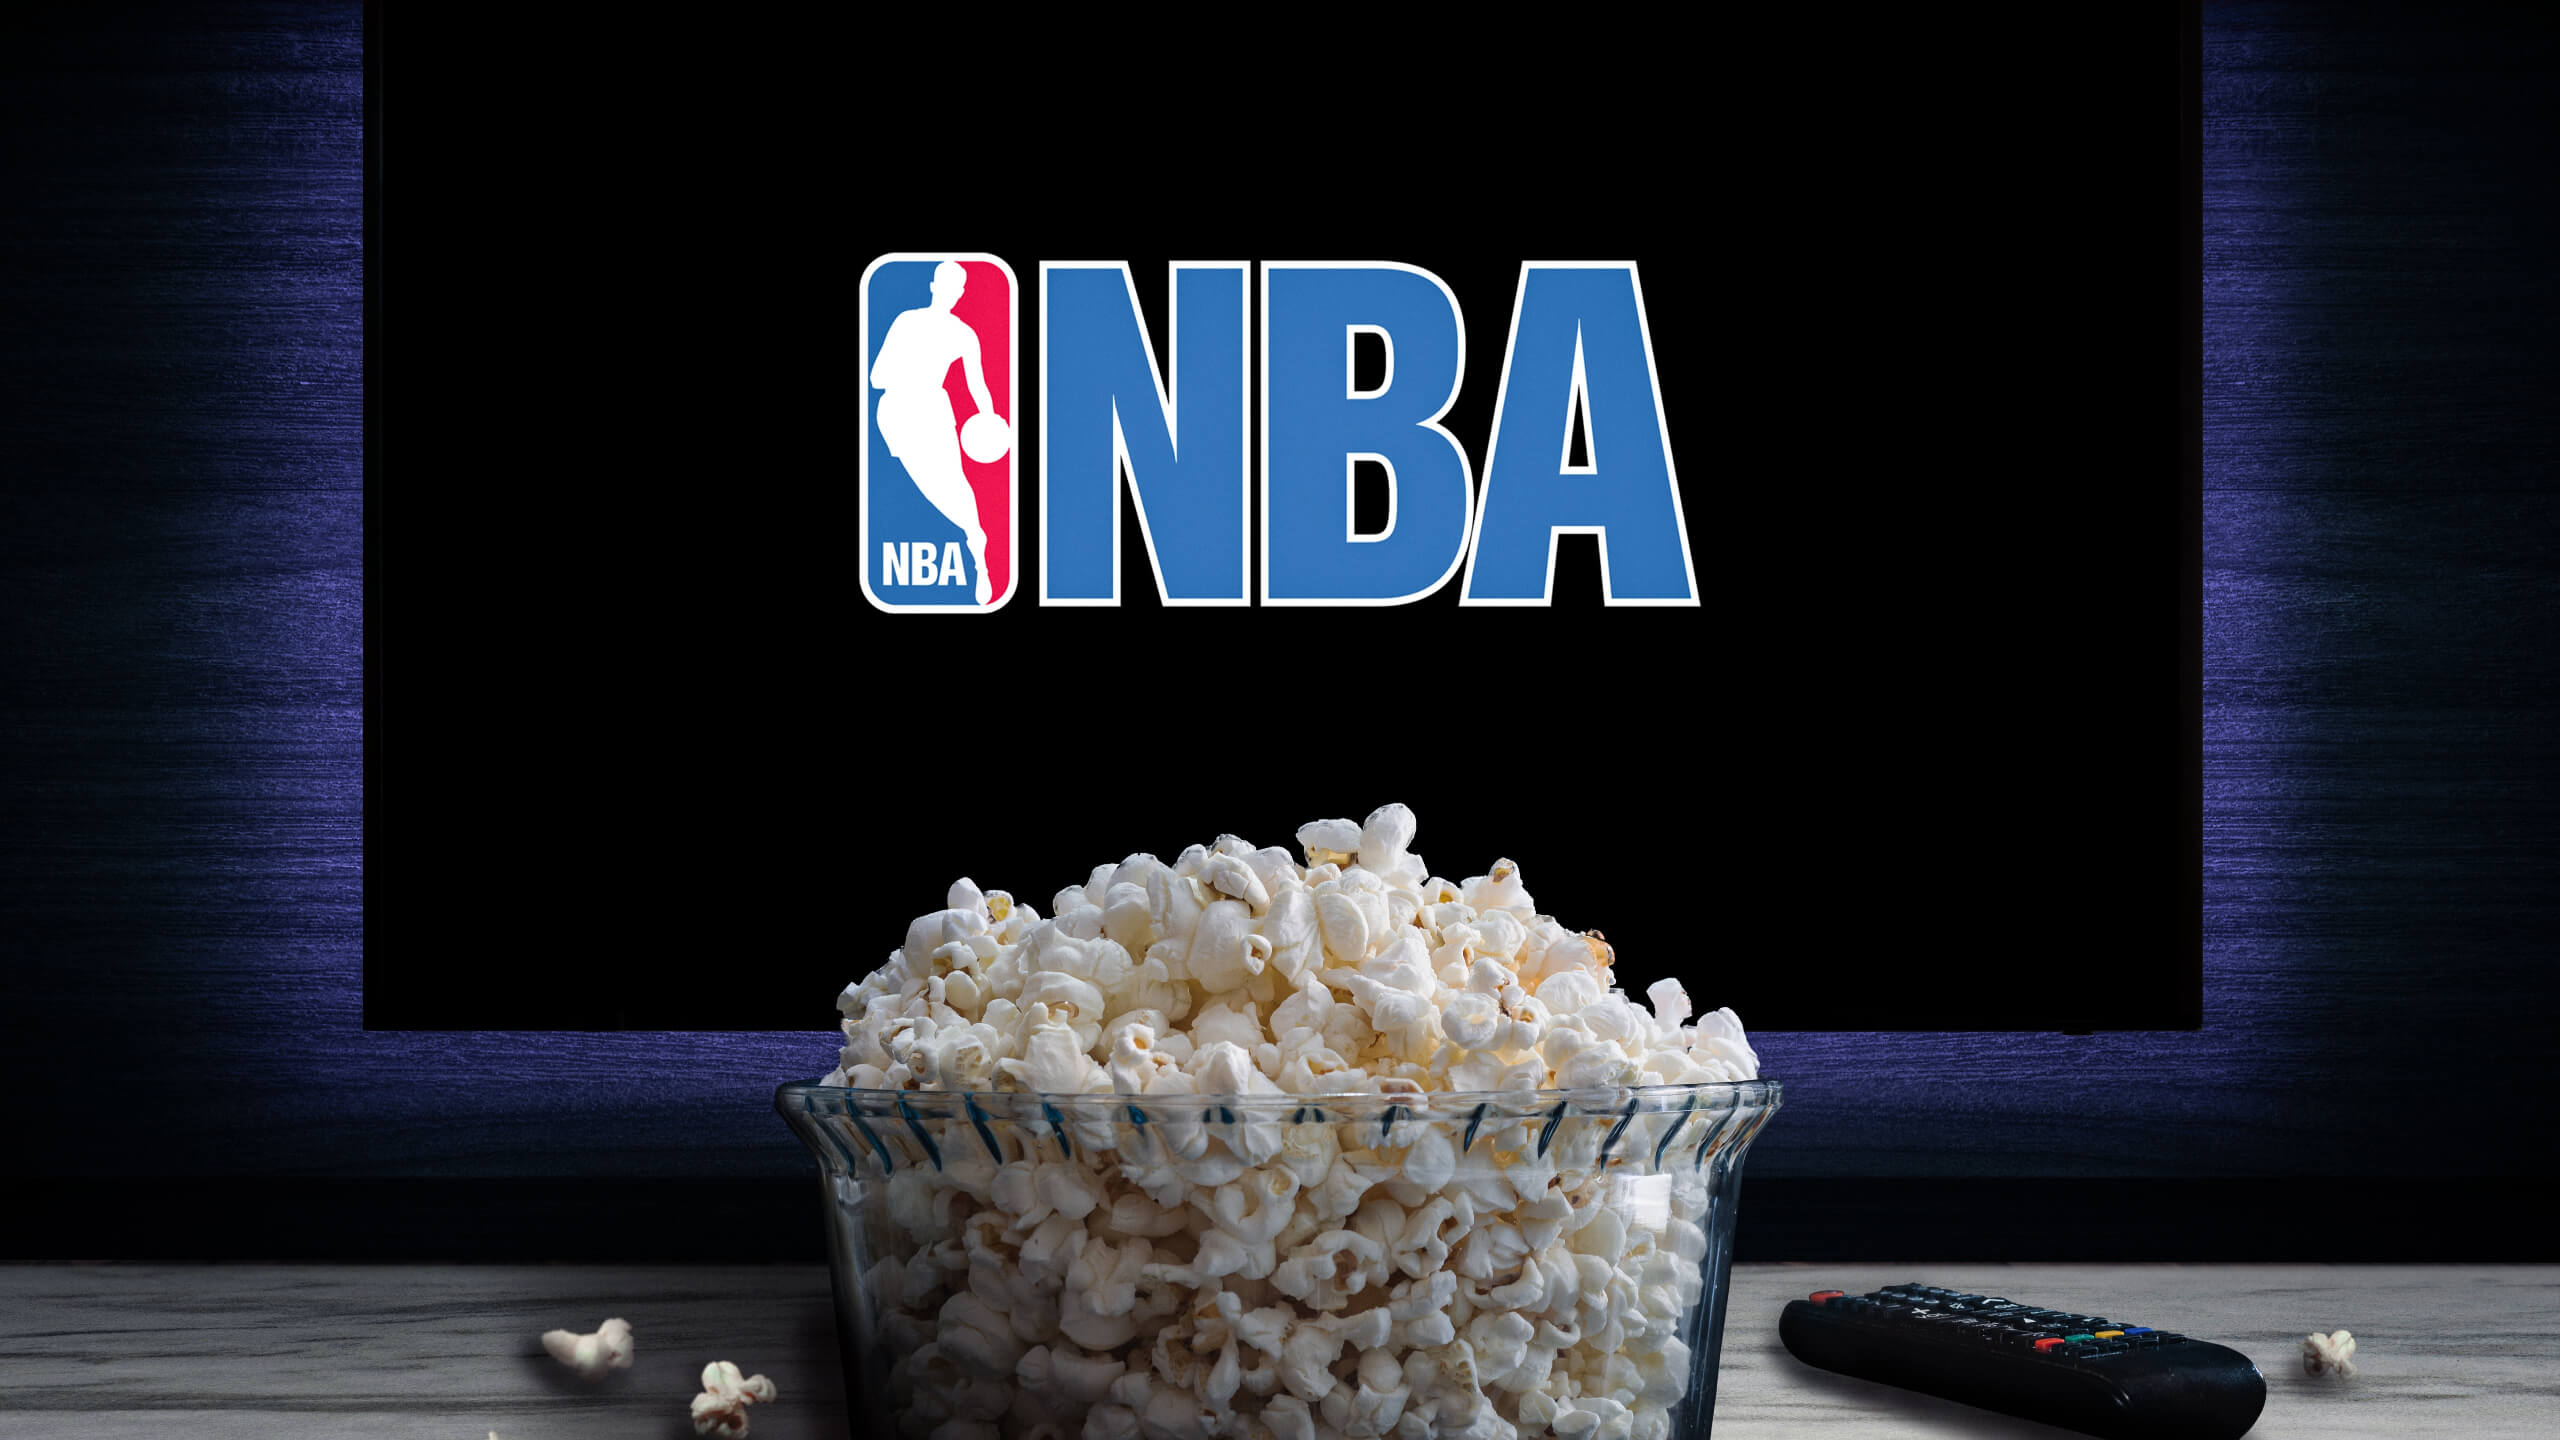 nba tv live streaming today